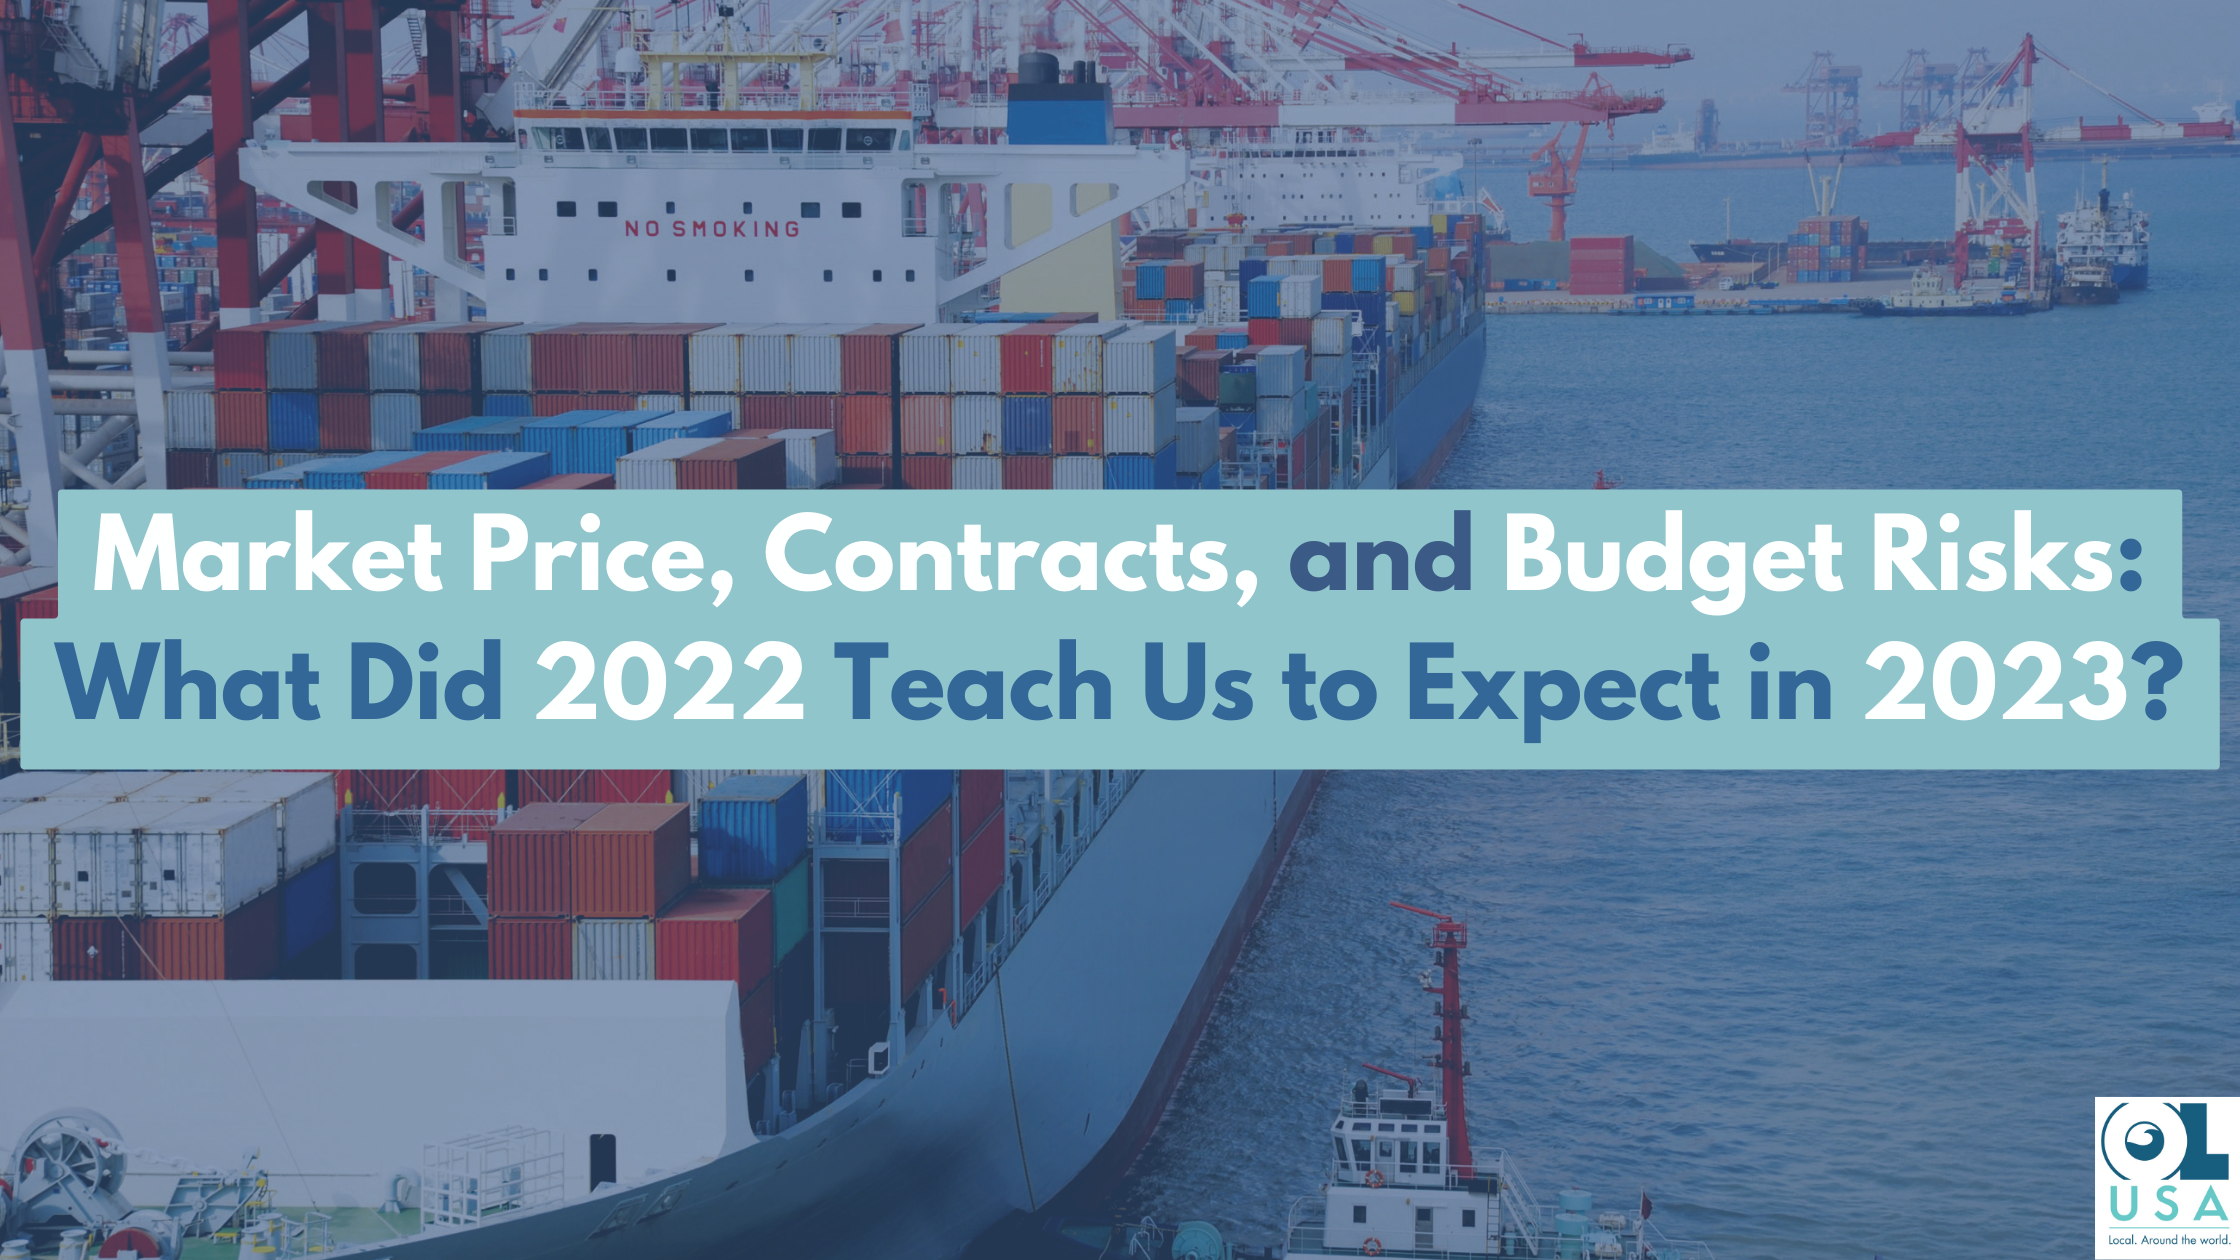 market-price-contracts-and-budget-risks-what-did-2022-teach-us-to-expect-in-2023-OL-USA